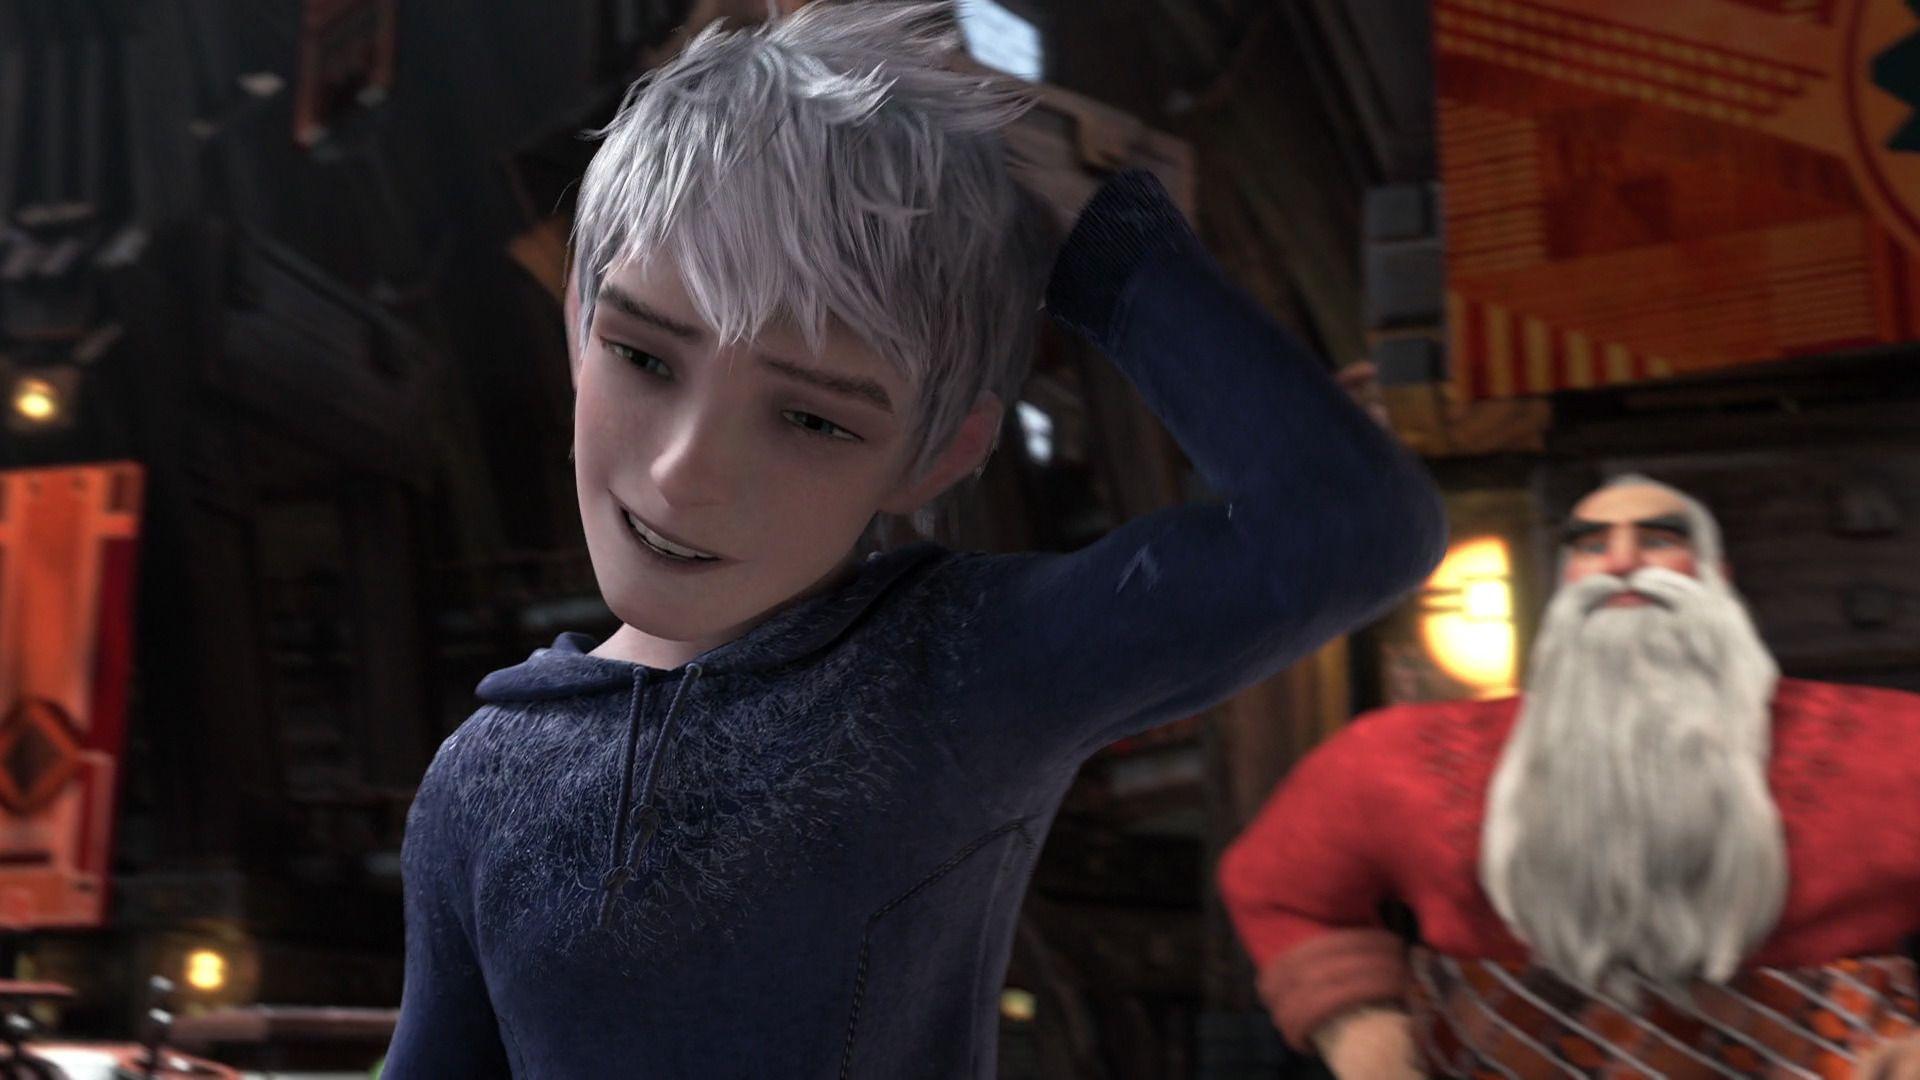 17 Best image about Jack Frost Rise Of The Guardians.